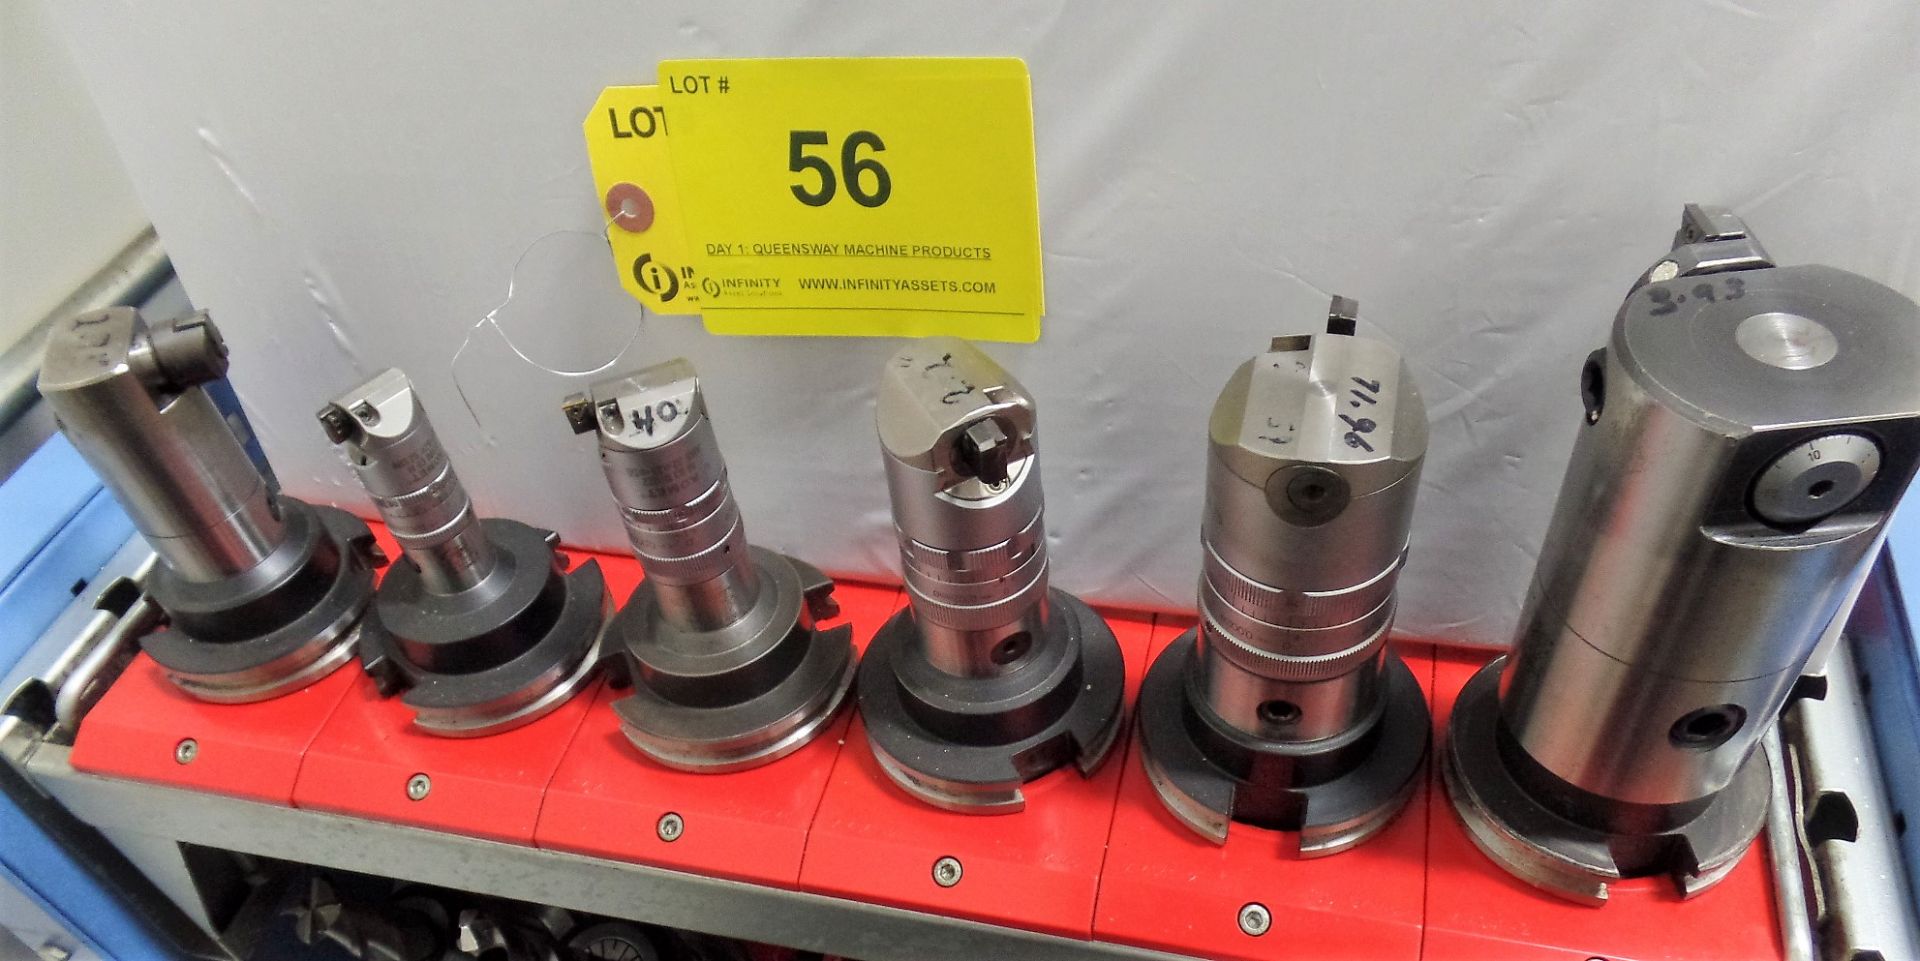 CAT 45 TOOL HOLDERS W/CUTTING ATTACHMENTS (TRAY HOLDER NOT INCLUDED) - Image 2 of 2